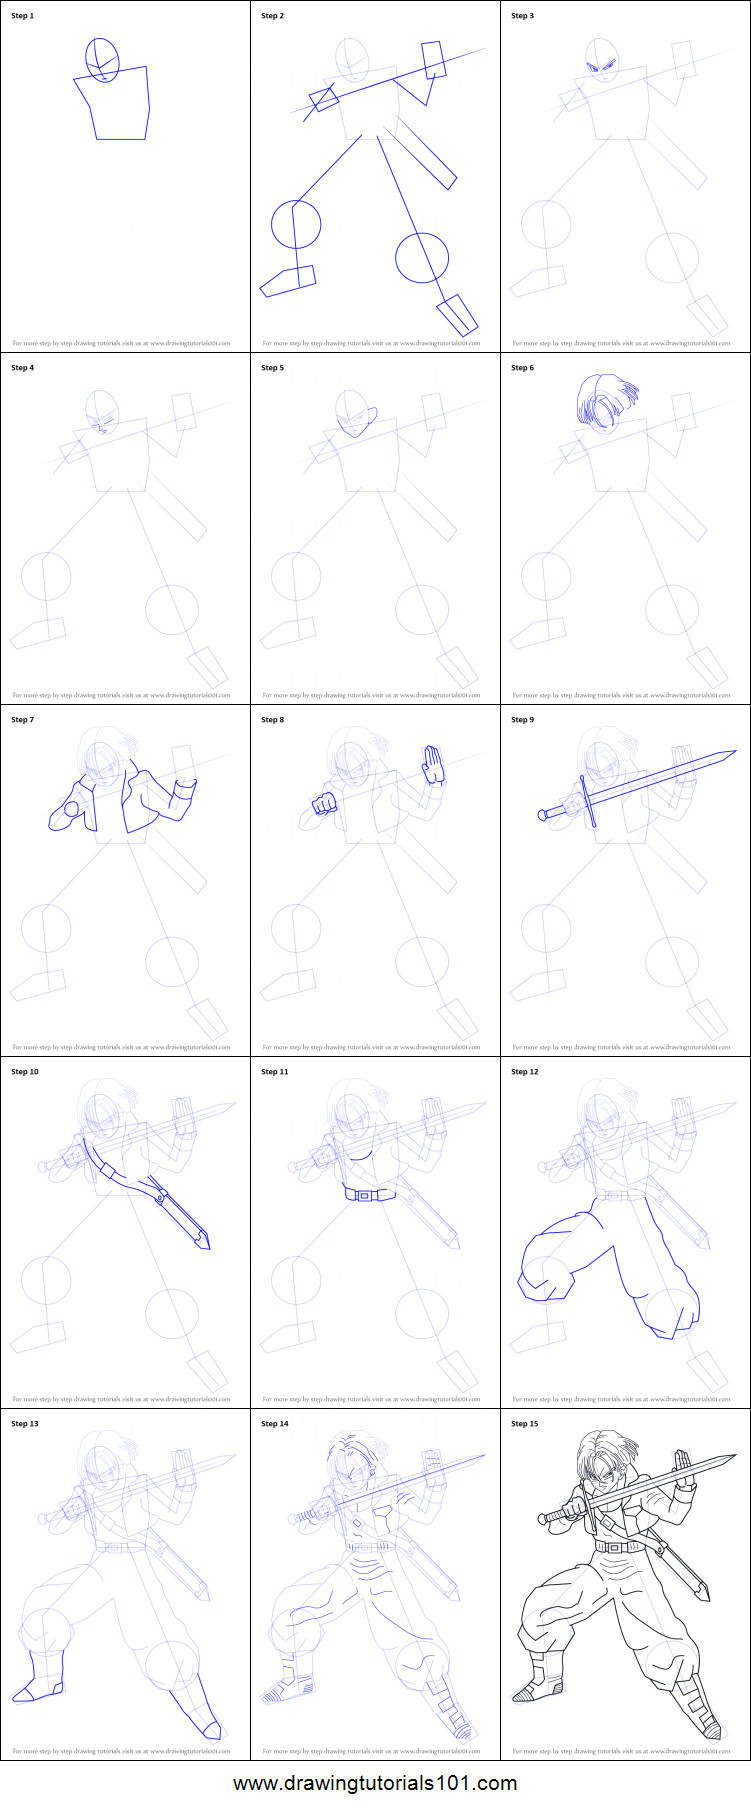 Drawing Steps for Dragons How to Draw Trunks From Dragon Ball Z Printable Step by Step Drawing